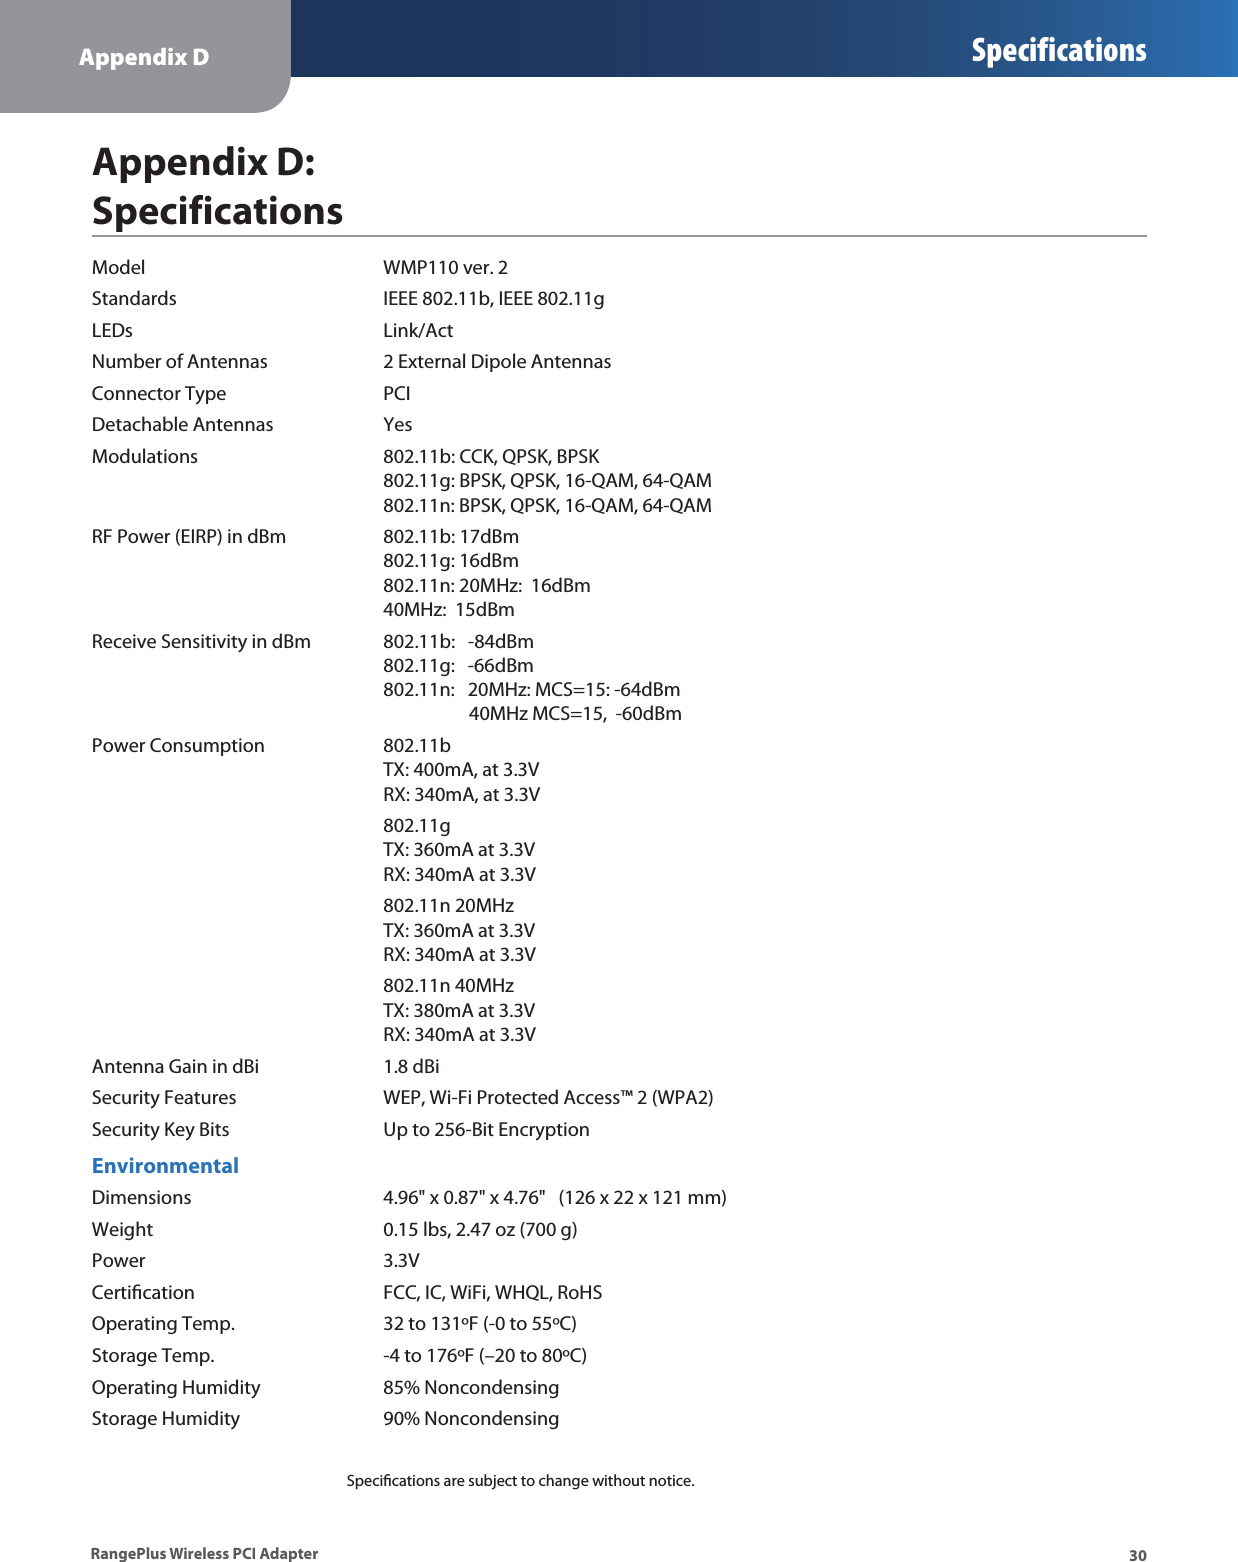 Appendix D Specifications30RangePlus Wireless PCI AdapterAppendix D: SpecificationsModel     WMP110 ver. 2Standards      IEEE 802.11b, IEEE 802.11gLEDs    Link/ActNumber of Antennas     2 External Dipole AntennasConnector Type      PCIDetachable Antennas     YesModulations    802.11b: CCK, QPSK, BPSK           802.11g: BPSK, QPSK, 16-QAM, 64-QAM           802.11n: BPSK, QPSK, 16-QAM, 64-QAM RF Power (EIRP) in dBm  802.11b: 17dBm             802.11g: 16dBm             802.11n: 20MHz:  16dBm             40MHz:  15dBm Receive Sensitivity in dBm 802.11b:   -84dBm            802.11g:   -66dBm            802.11n:   20MHz: MCS=15: -64dBm                 40MHz MCS=15,  -60dBmPower Consumption   802.11b             TX: 400mA, at 3.3V             RX: 340mA, at 3.3V  802.11g             TX: 360mA at 3.3V             RX: 340mA at 3.3V  802.11n 20MHz            TX: 360mA at 3.3V             RX: 340mA at 3.3V  802.11n 40MHz            TX: 380mA at 3.3V             RX: 340mA at 3.3VAntenna Gain in dBi      1.8 dBiSecurity Features      WEP, Wi-Fi Protected Access™ 2 (WPA2)Security Key Bits      Up to 256-Bit EncryptionEnvironmentalDimensions      4.96&quot; x 0.87&quot; x 4.76&quot;   (126 x 22 x 121 mm)Weight     0.15 lbs, 2.47 oz (700 g)Power    3.3VCertiﬁcation      FCC, IC, WiFi, WHQL, RoHSOperating Temp.      32 to 131ºF (-0 to 55ºC)Storage Temp.      -4 to 176ºF (–20 to 80ºC)Operating Humidity      85% NoncondensingStorage Humidity     90% NoncondensingSpeciﬁcations are subject to change without notice.